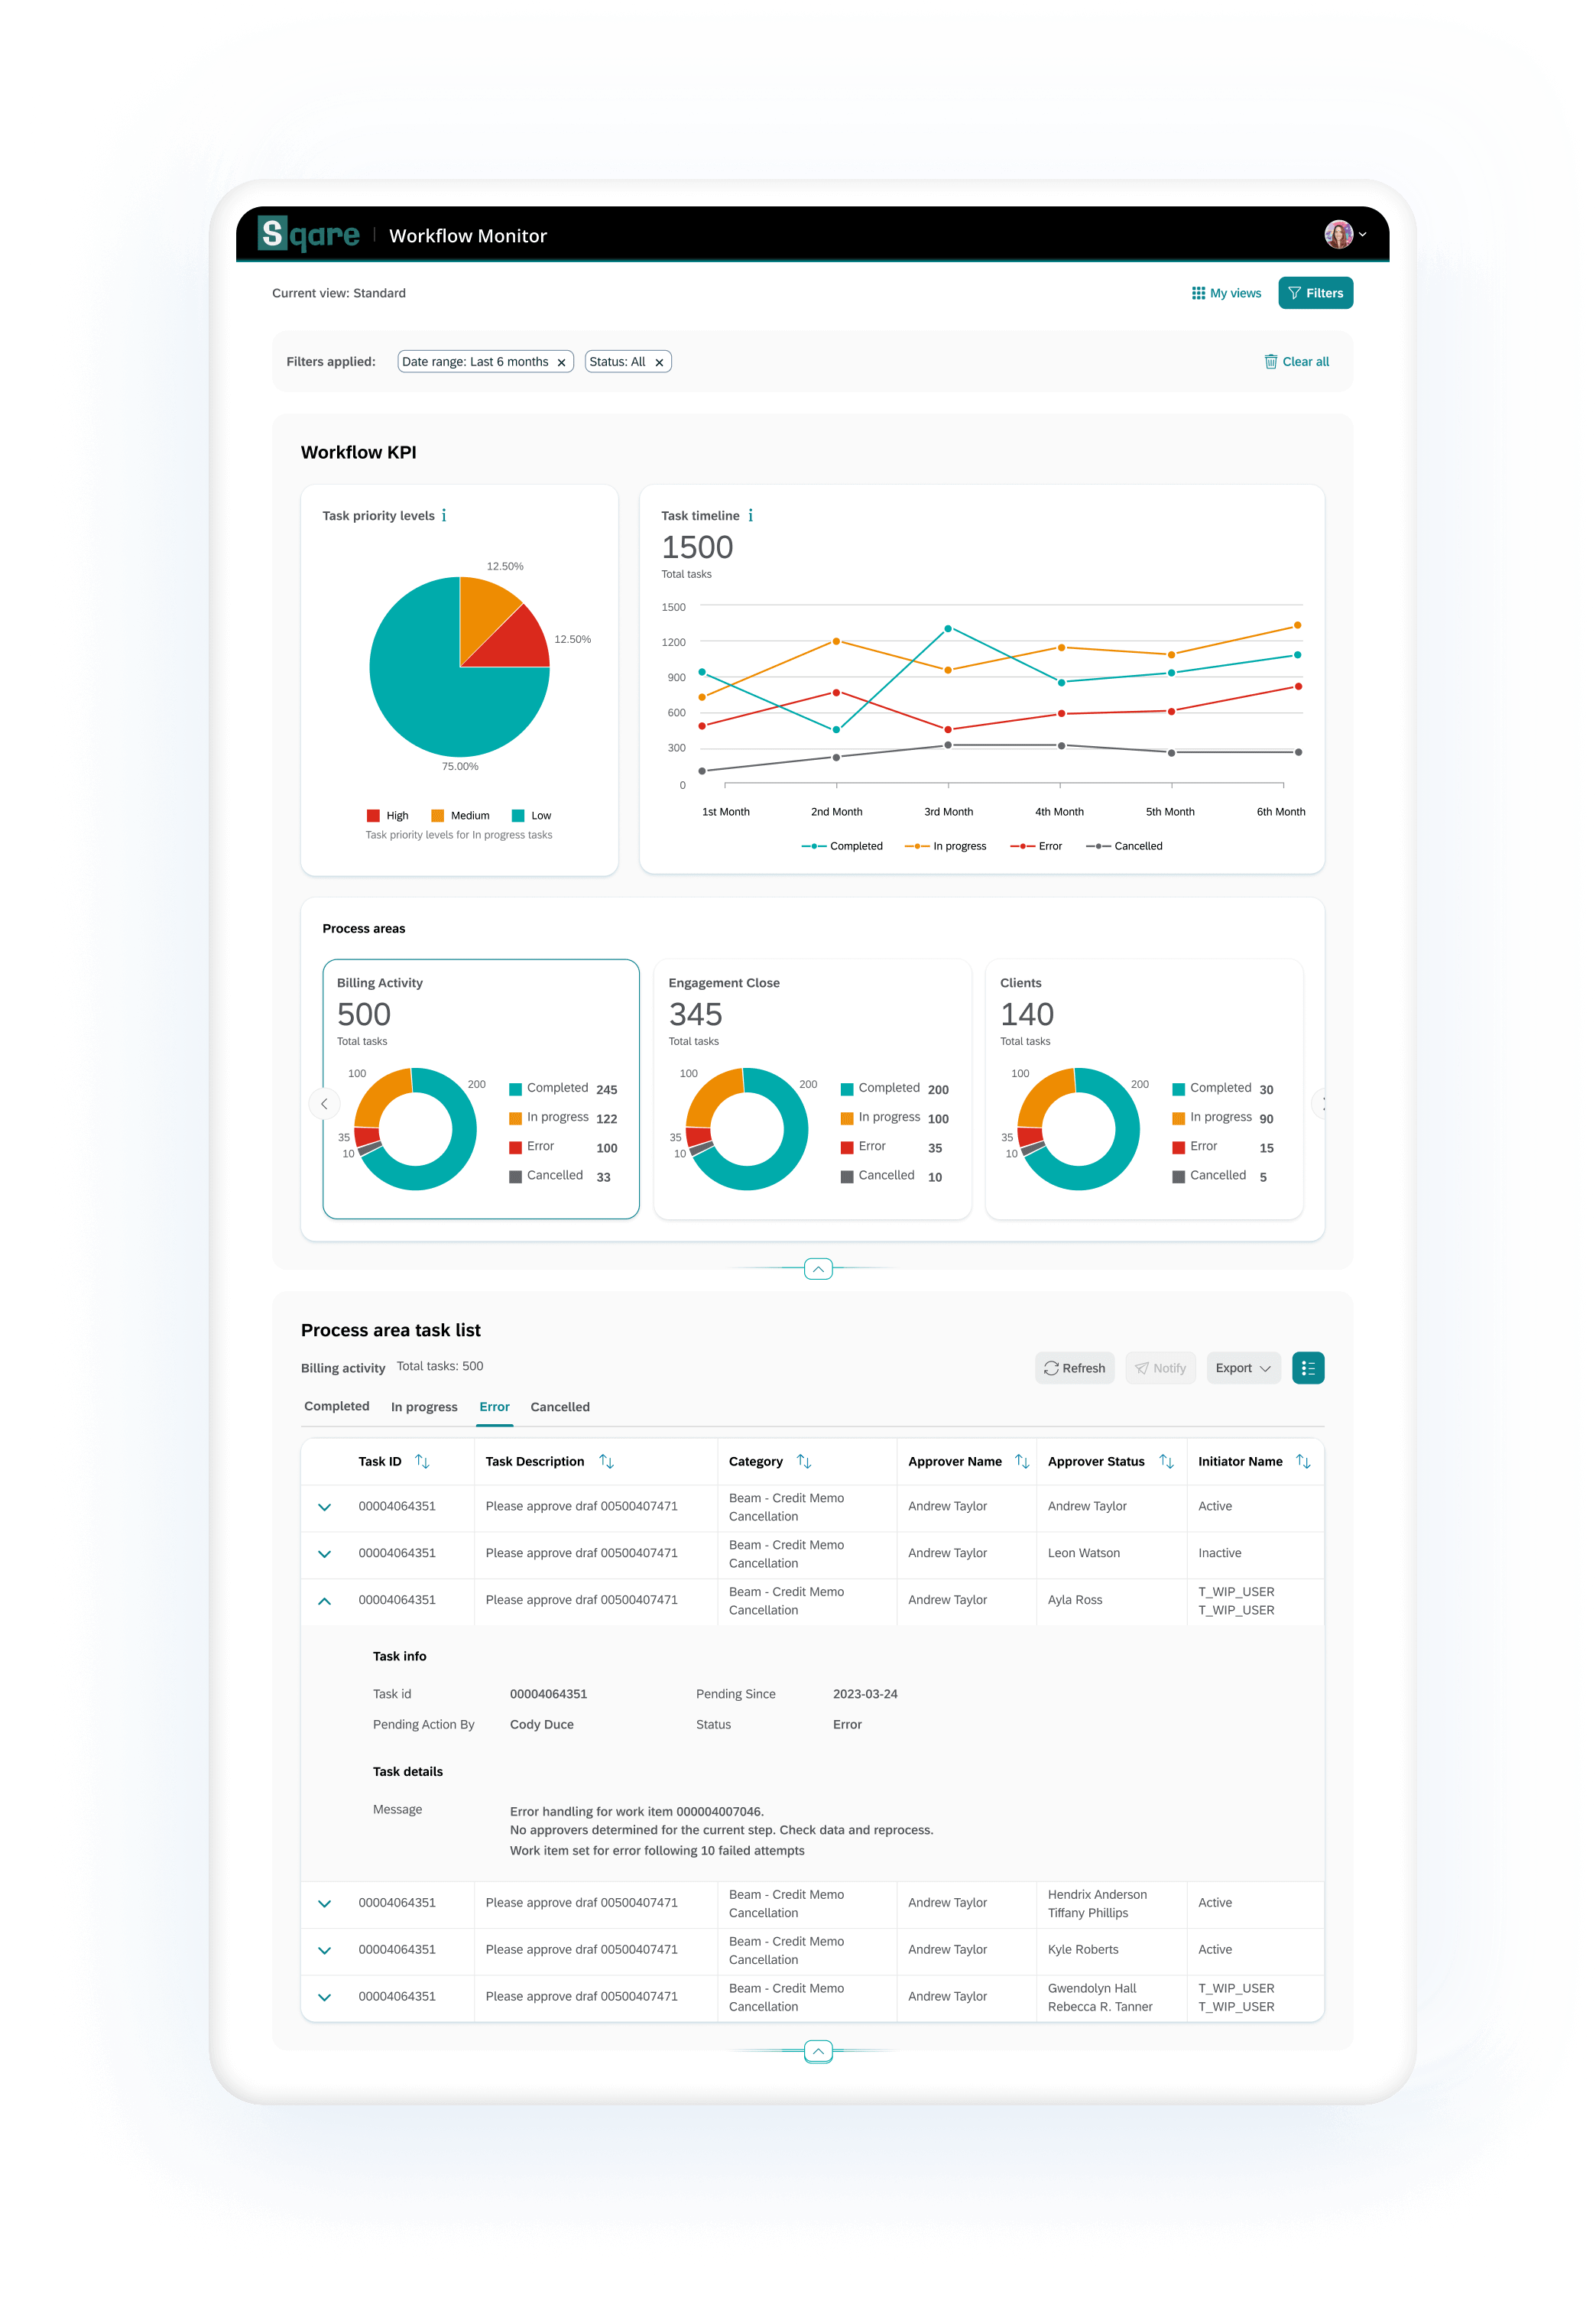 Mockup a dashboard containing pie, donuts and line charts and a table of the error process area task list